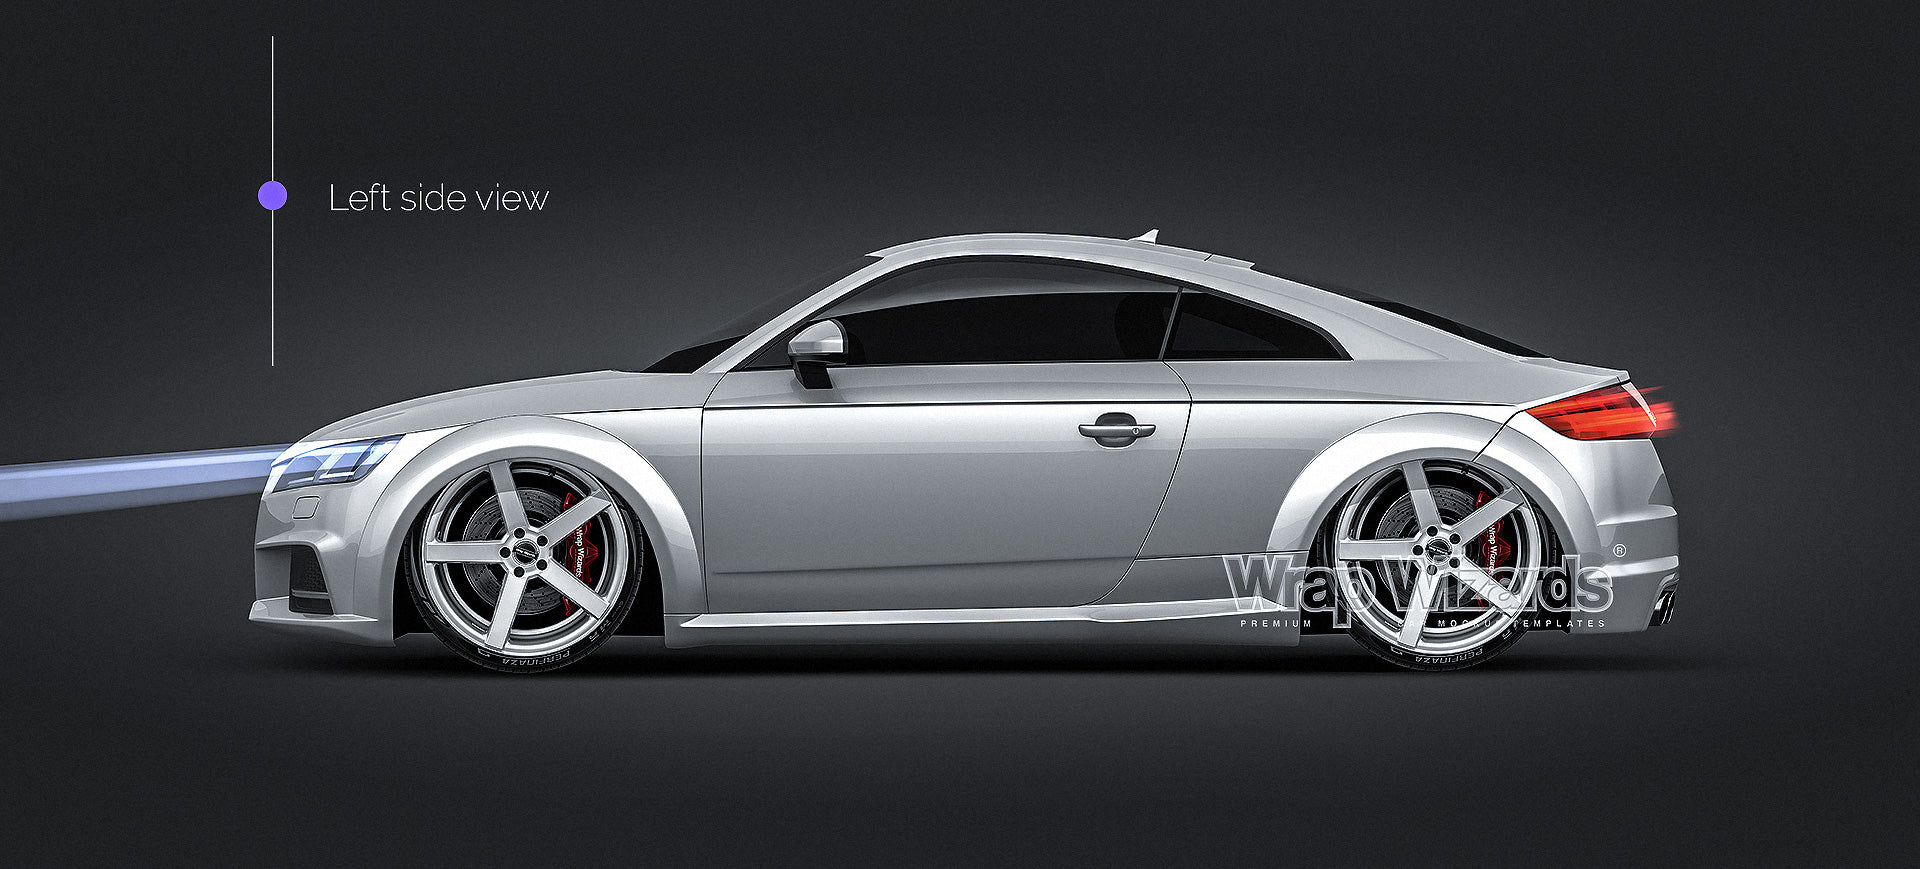 Audi TTS Coupe 2015 glossy finish - all sides Car Mockup Template.psd